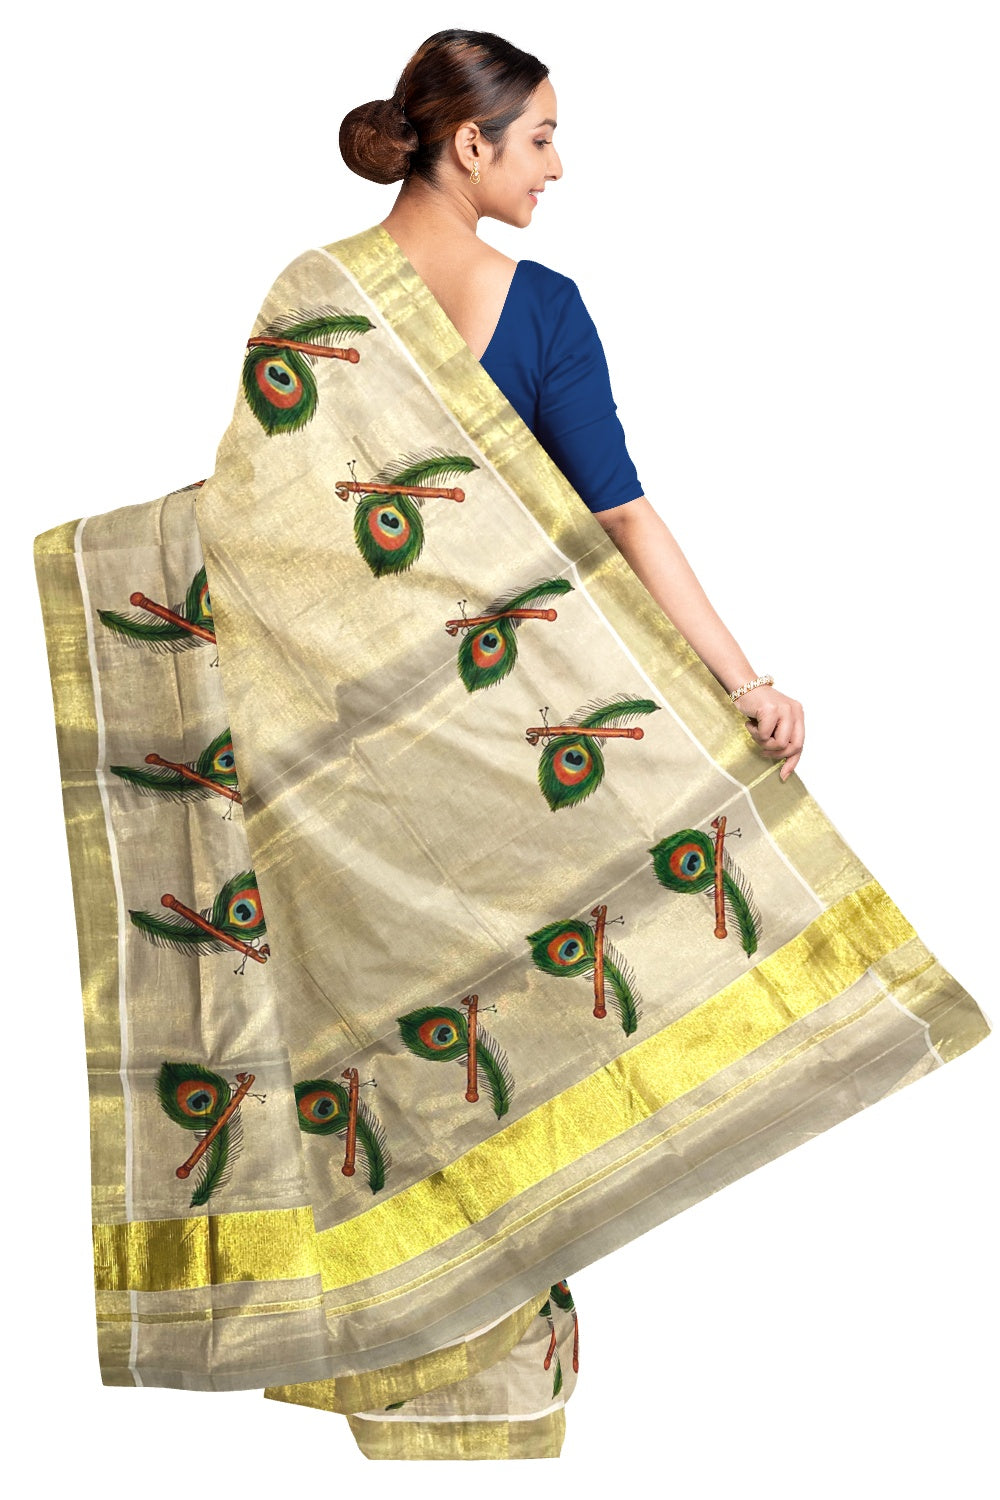 Kerala Tissue Kasavu Saree With Mural Printed Peacock Feather and Flute Design